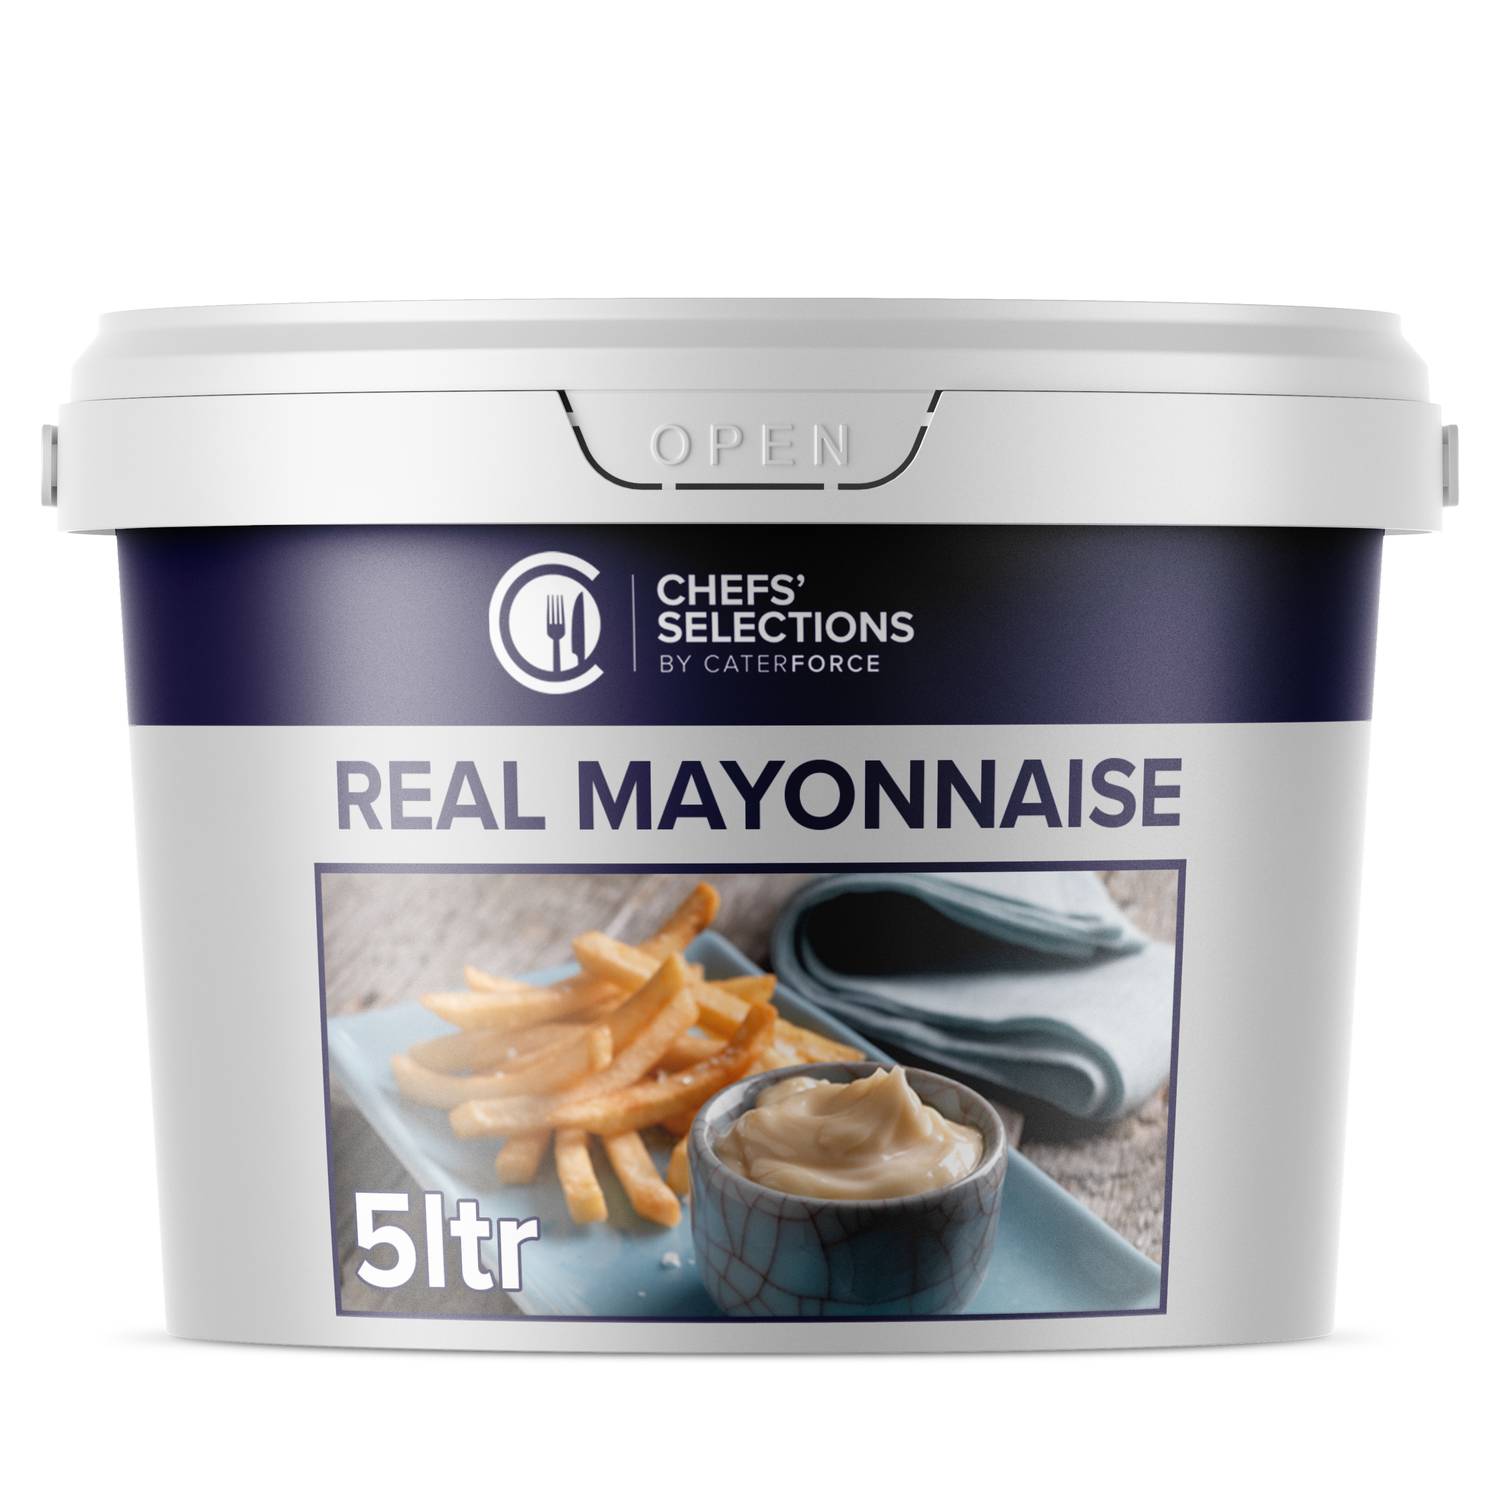 Chefs’ Selections Real Mayonnaise (1 x 5L)